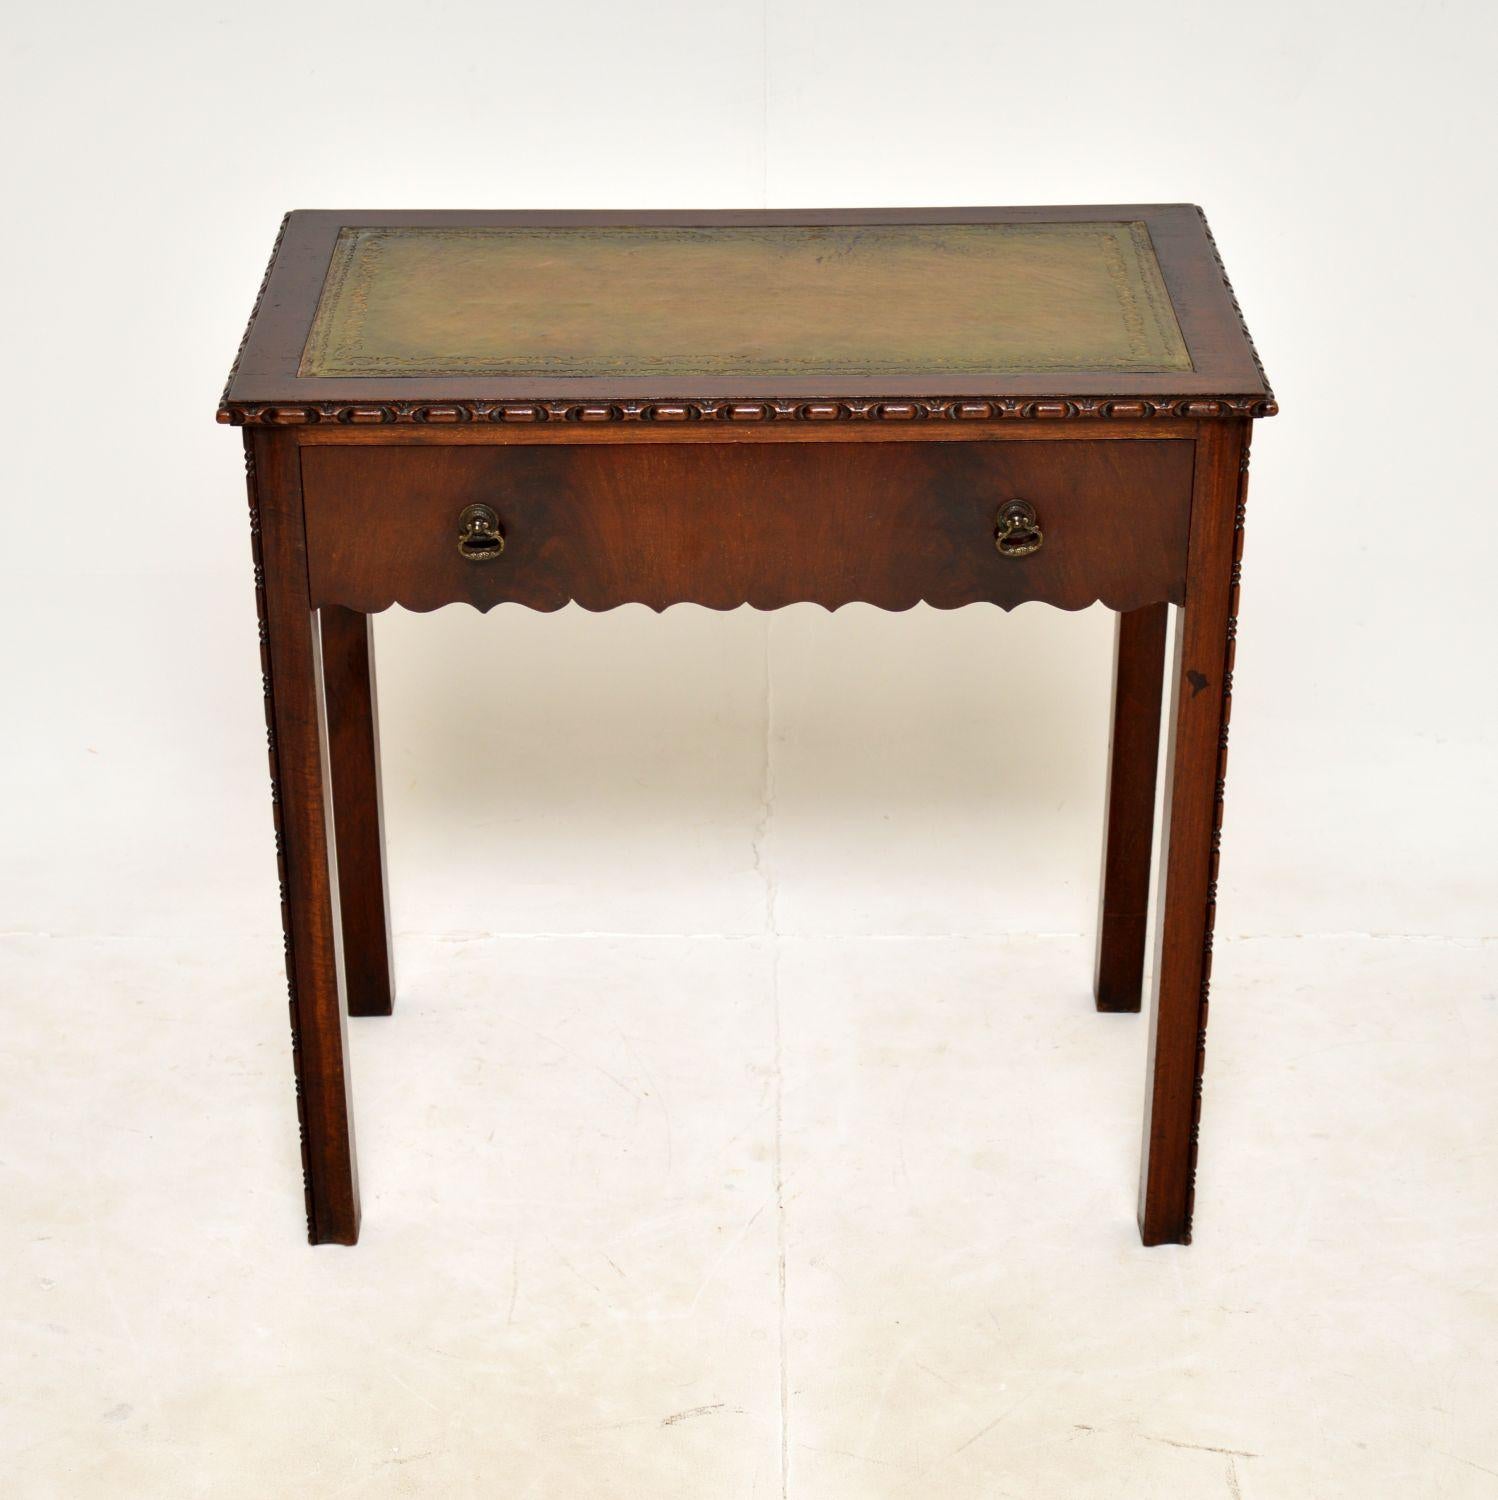 A charming antique writing desk / side table. This was made in England, it dates from around the 1900-1920 period.

It is of superb quality and is a very useful size. The single drawer has lovely brass handles and fine, hand cut dovetailed joints.